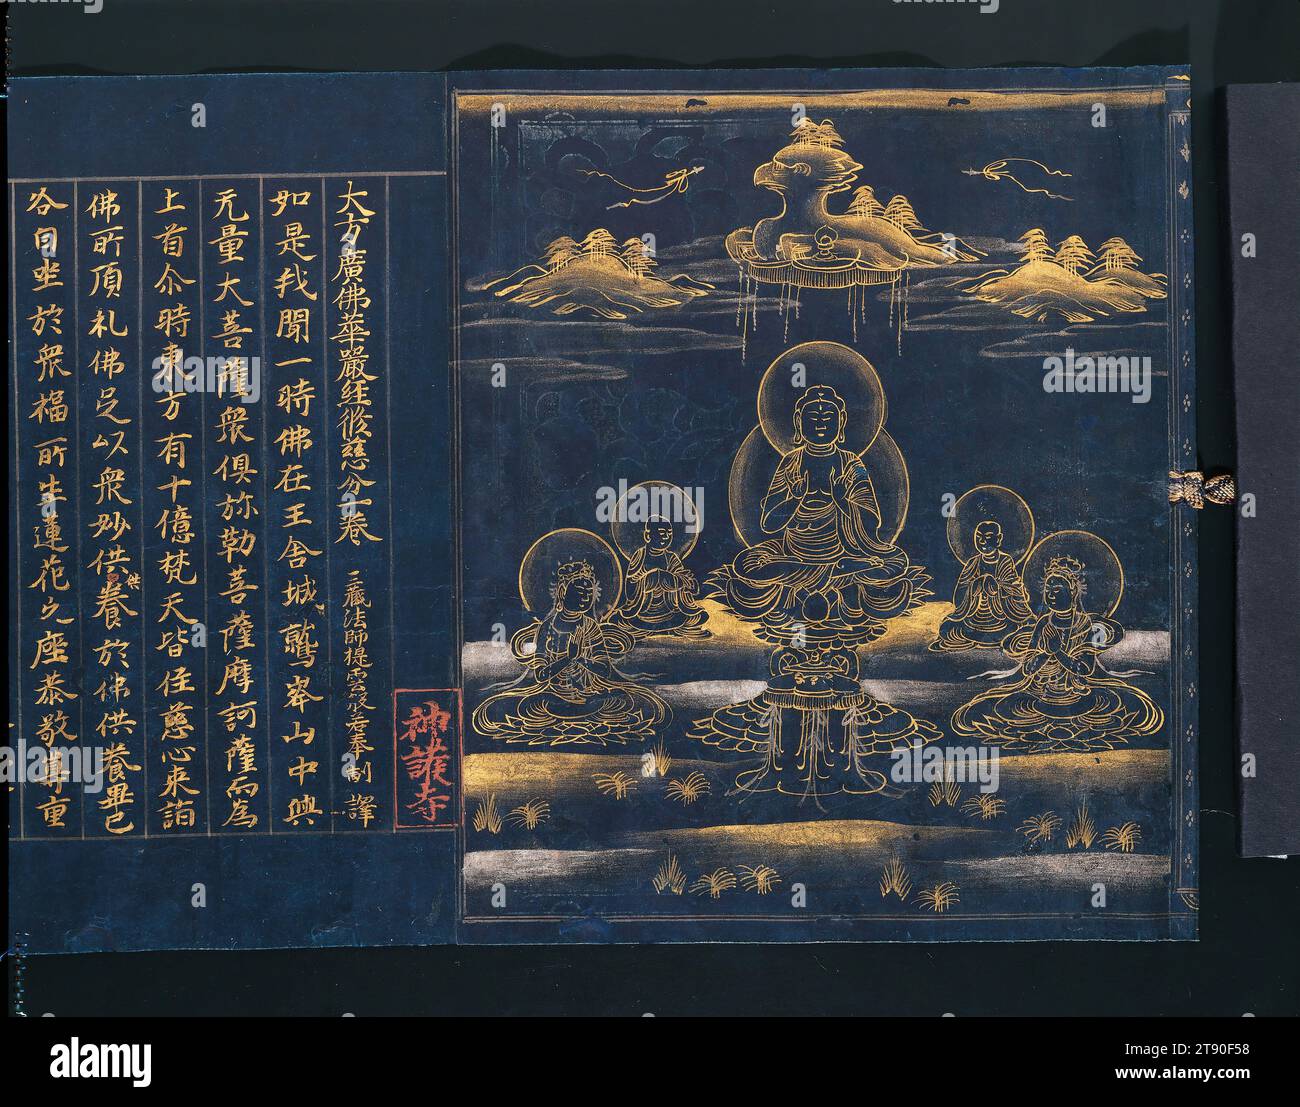 Chapter from the Expanded Flower Garland Sutra, one of the 'Jingoji Sutras', before 1156, Unknown Japanese, 10 1/8 × 148 11/16 in. (25.72 × 377.67 cm), Gold and silver ink on indigo paper, Japan, 12th century, One of several thousand scrolls comprising the Buddhist Tripitaka in its entirety, this scroll is a copy of one chapter of the Expanded Flower Garland Sutra (Avatamsaka-mahavaipulya sutra), which is a discussion of the Six Ways (Satparamitra) of proper conduct on the road to enlightenment. The image on the frontispiece, painted in gold and silver ink, shows the Buddha preaching Stock Photo